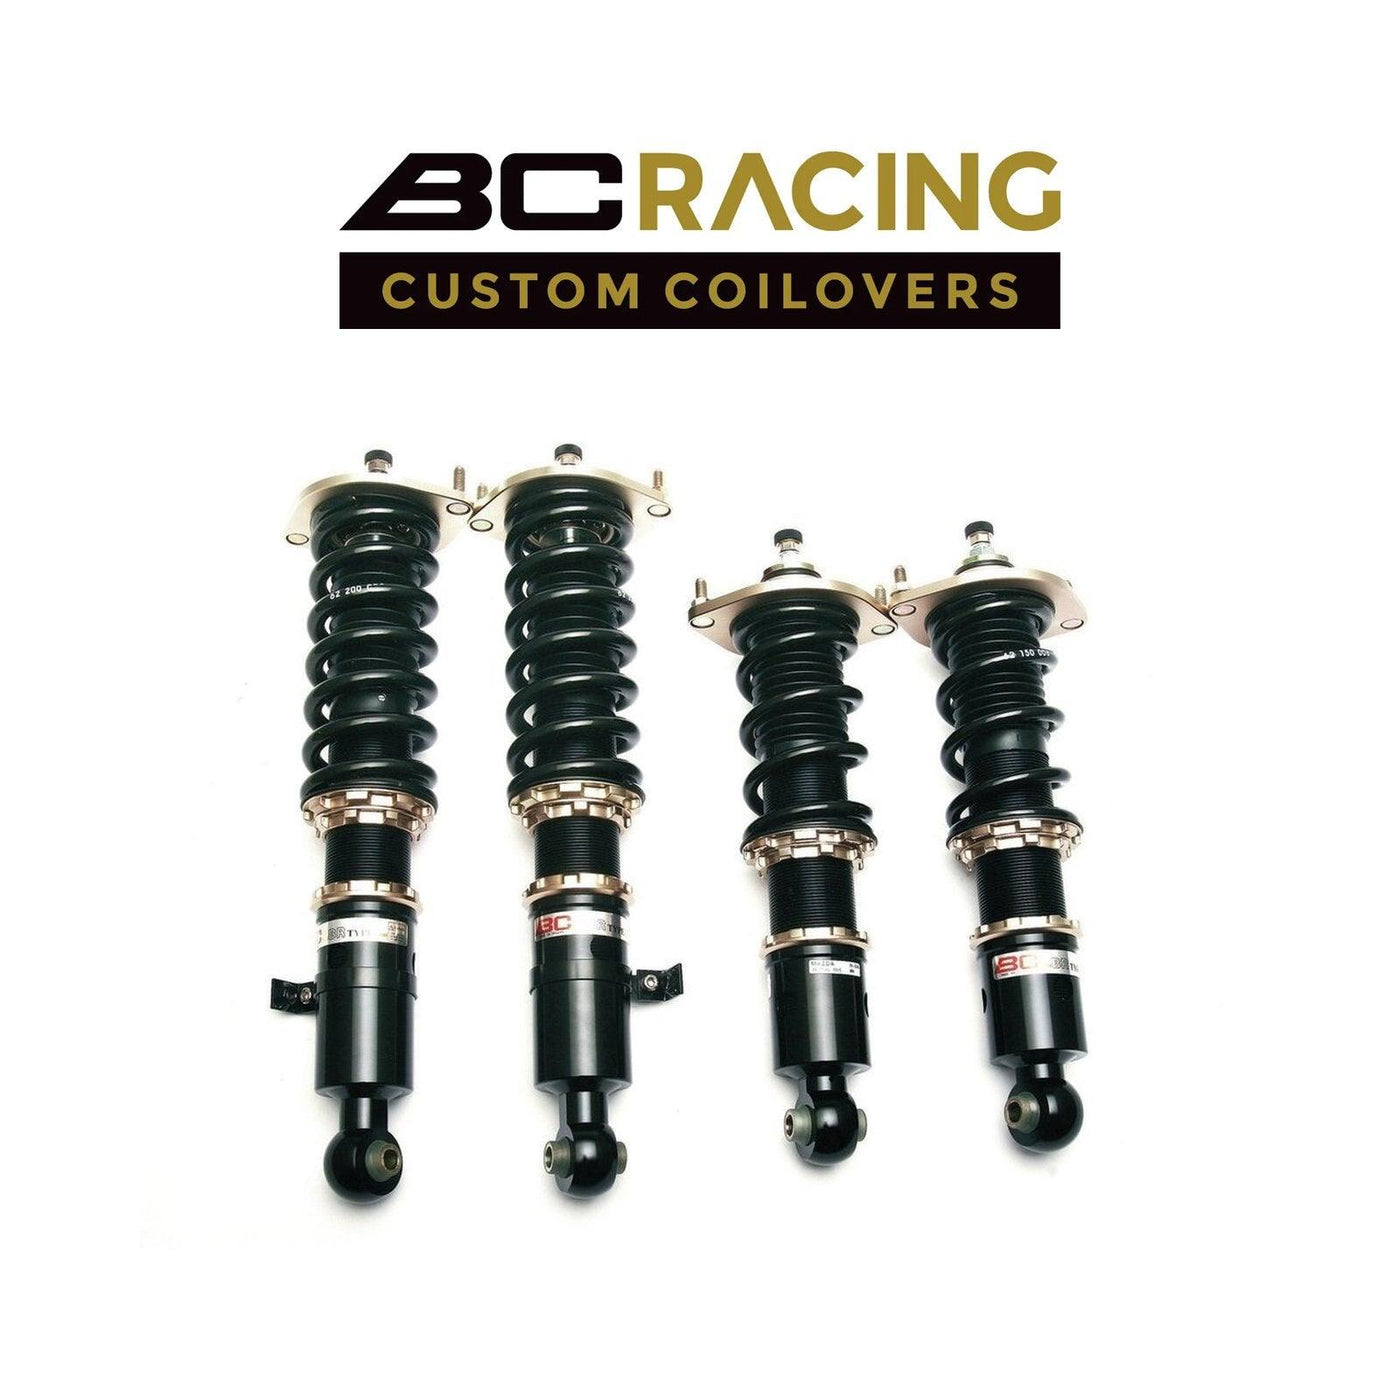 BC Racing Coilovers 2000-2009 HONDA S2000 EXTREME BY DEFAULT - Attacking the Clock Racing